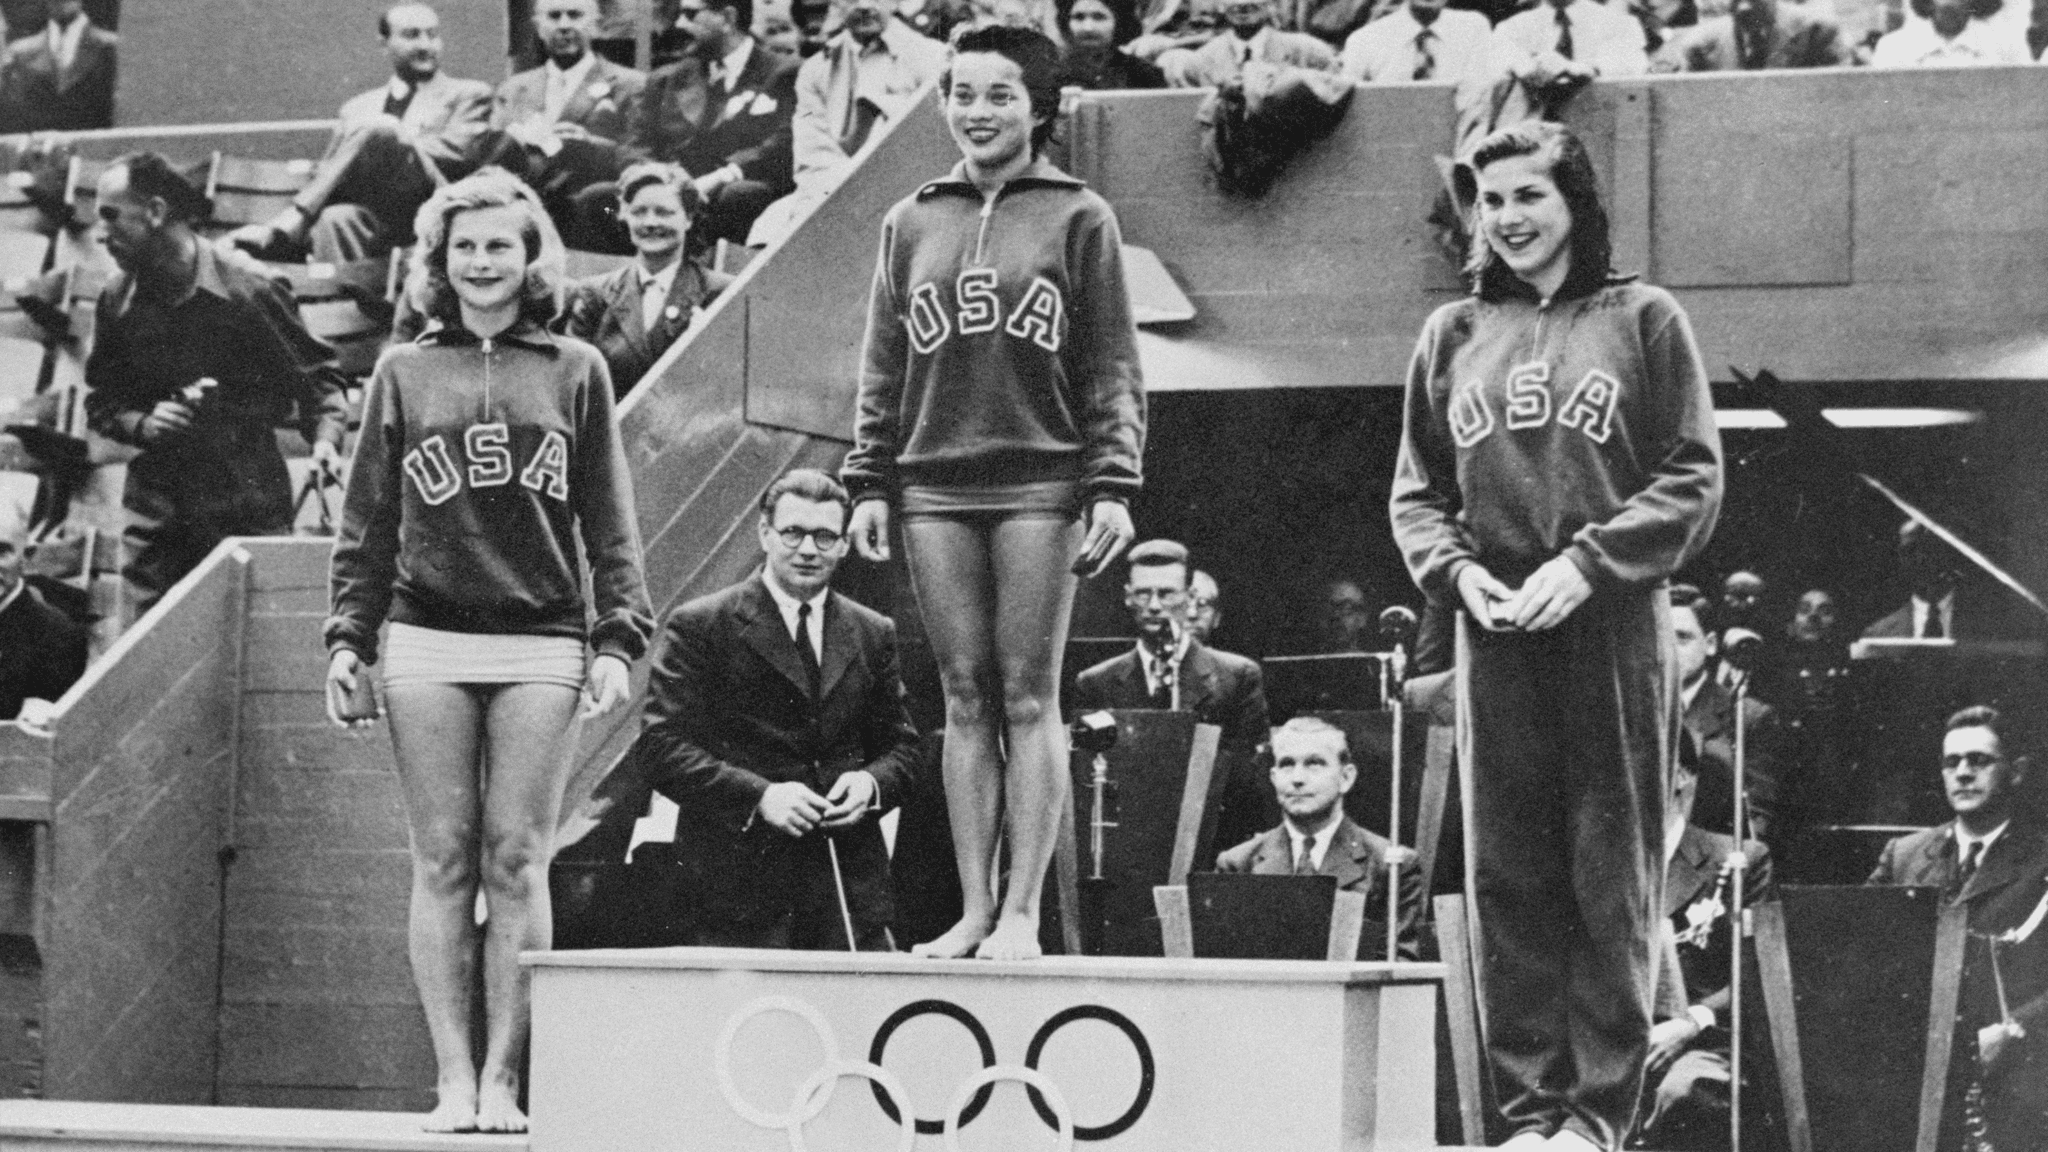 Vicki Draves stands on a podium with two other U.S. divers